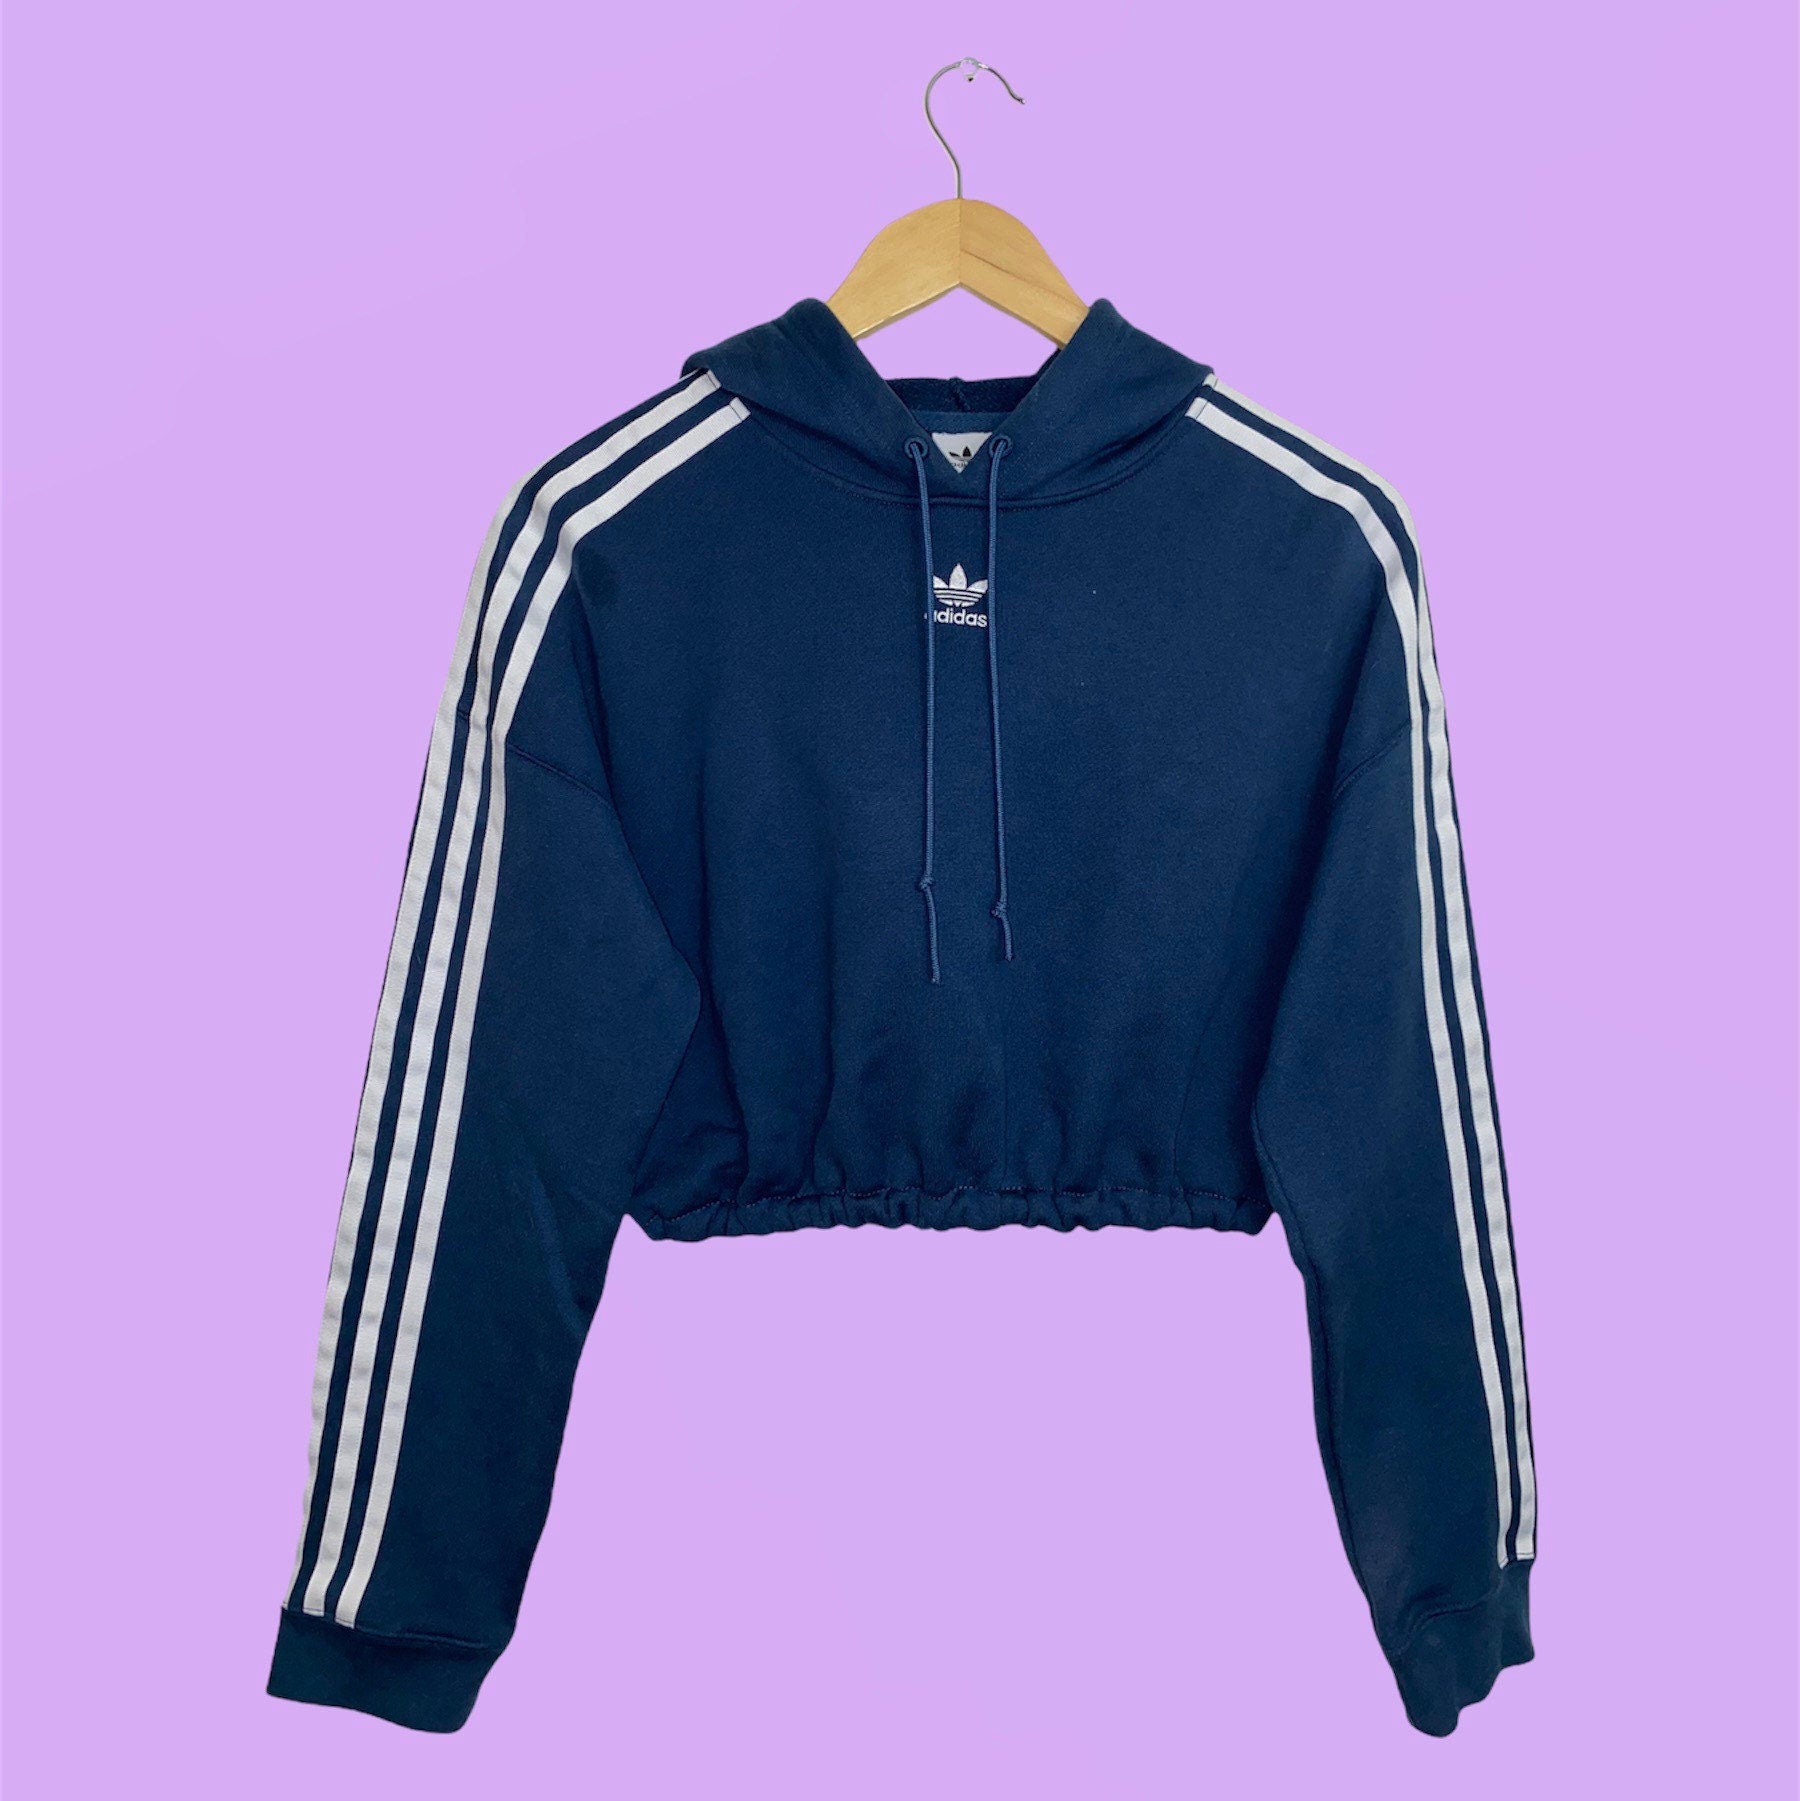 navy cropped hoodie with small Adidas text logo and symbol and white 3 stripes down the sleeves shown on a wood clothes hanger on a lilac background